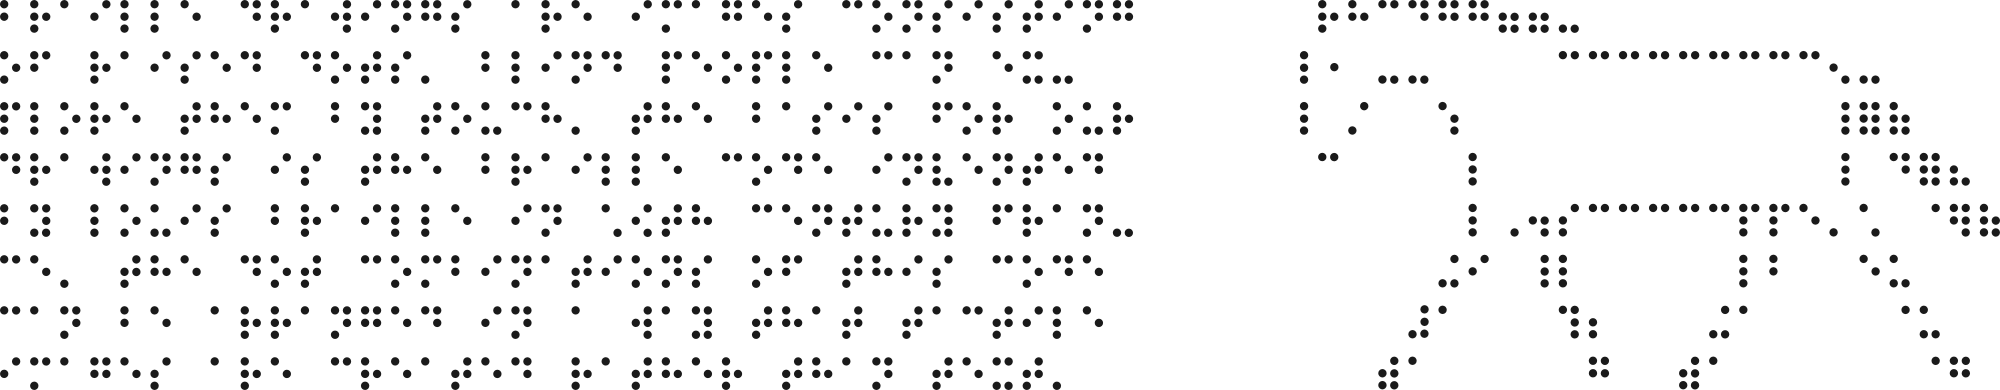 Text with braille letters and the braille drawing of a horse